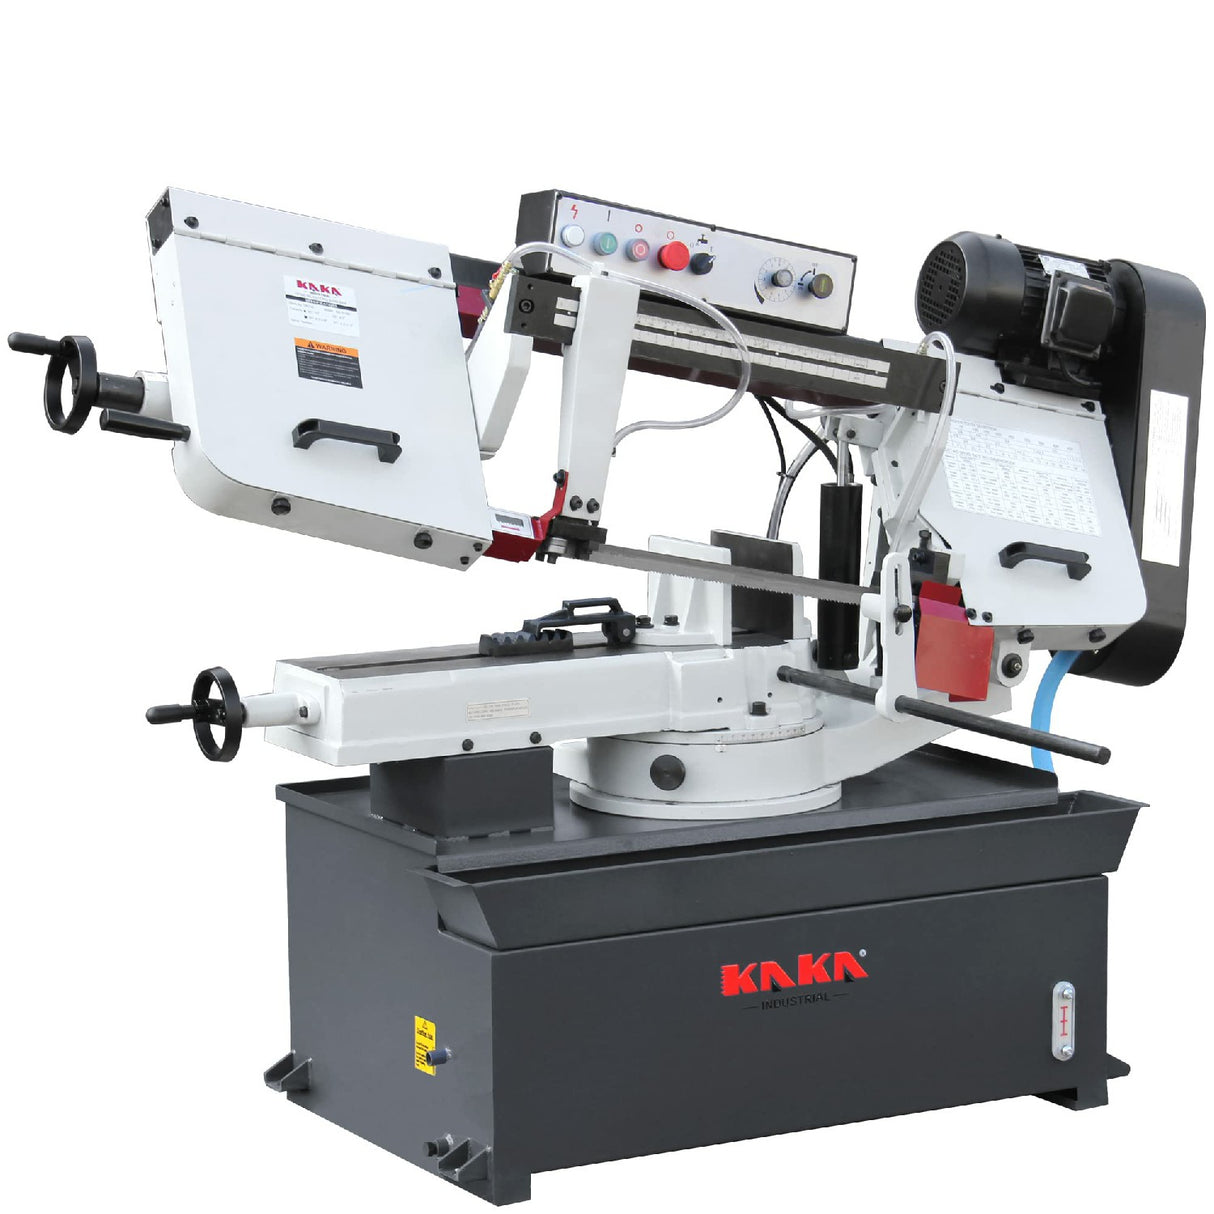 KANG Industrial BS-1018R 254mm Horizontal Bandsaw, Metal Cutting Band Saw, Swivel Saw Frame Between 45° and 90° Solid Design, 415V